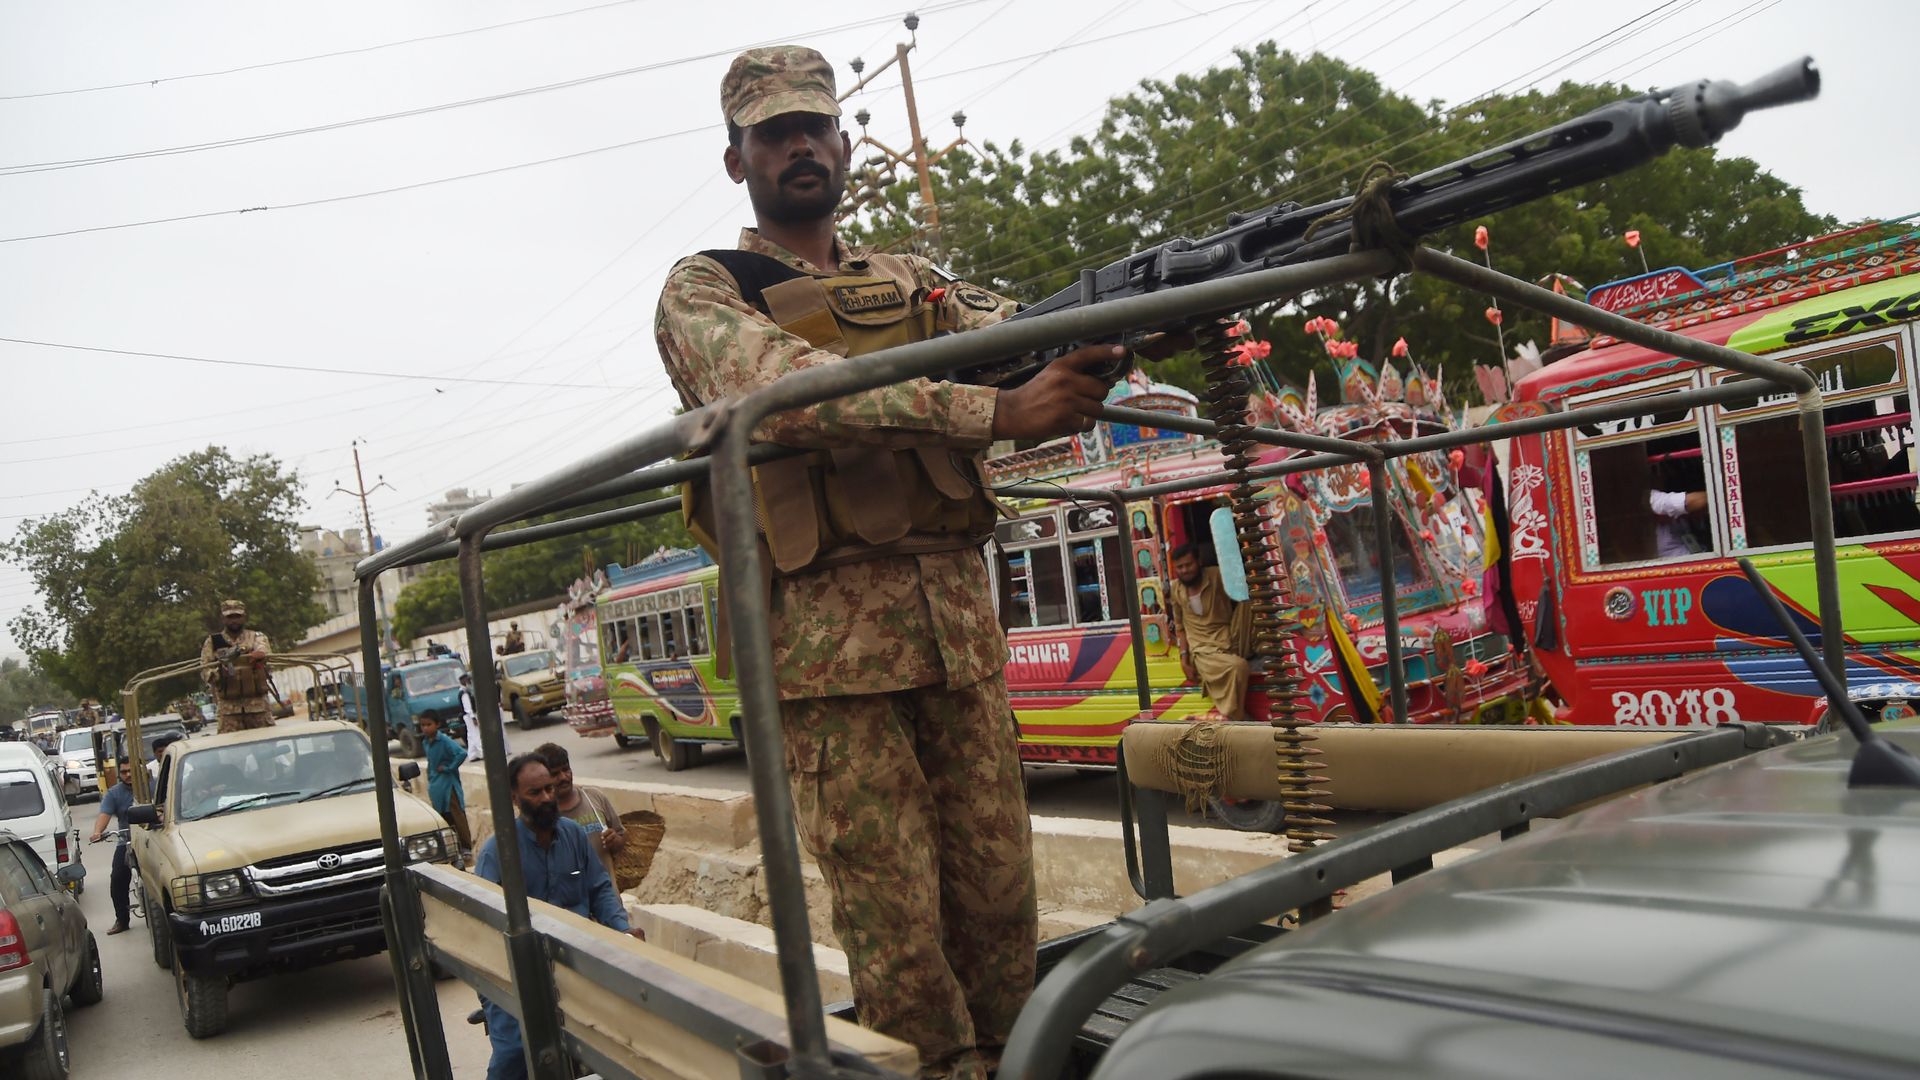 Pakistani soldiers patrol a street in an armored truck in the port city of Karachi on July 24, 2018. 